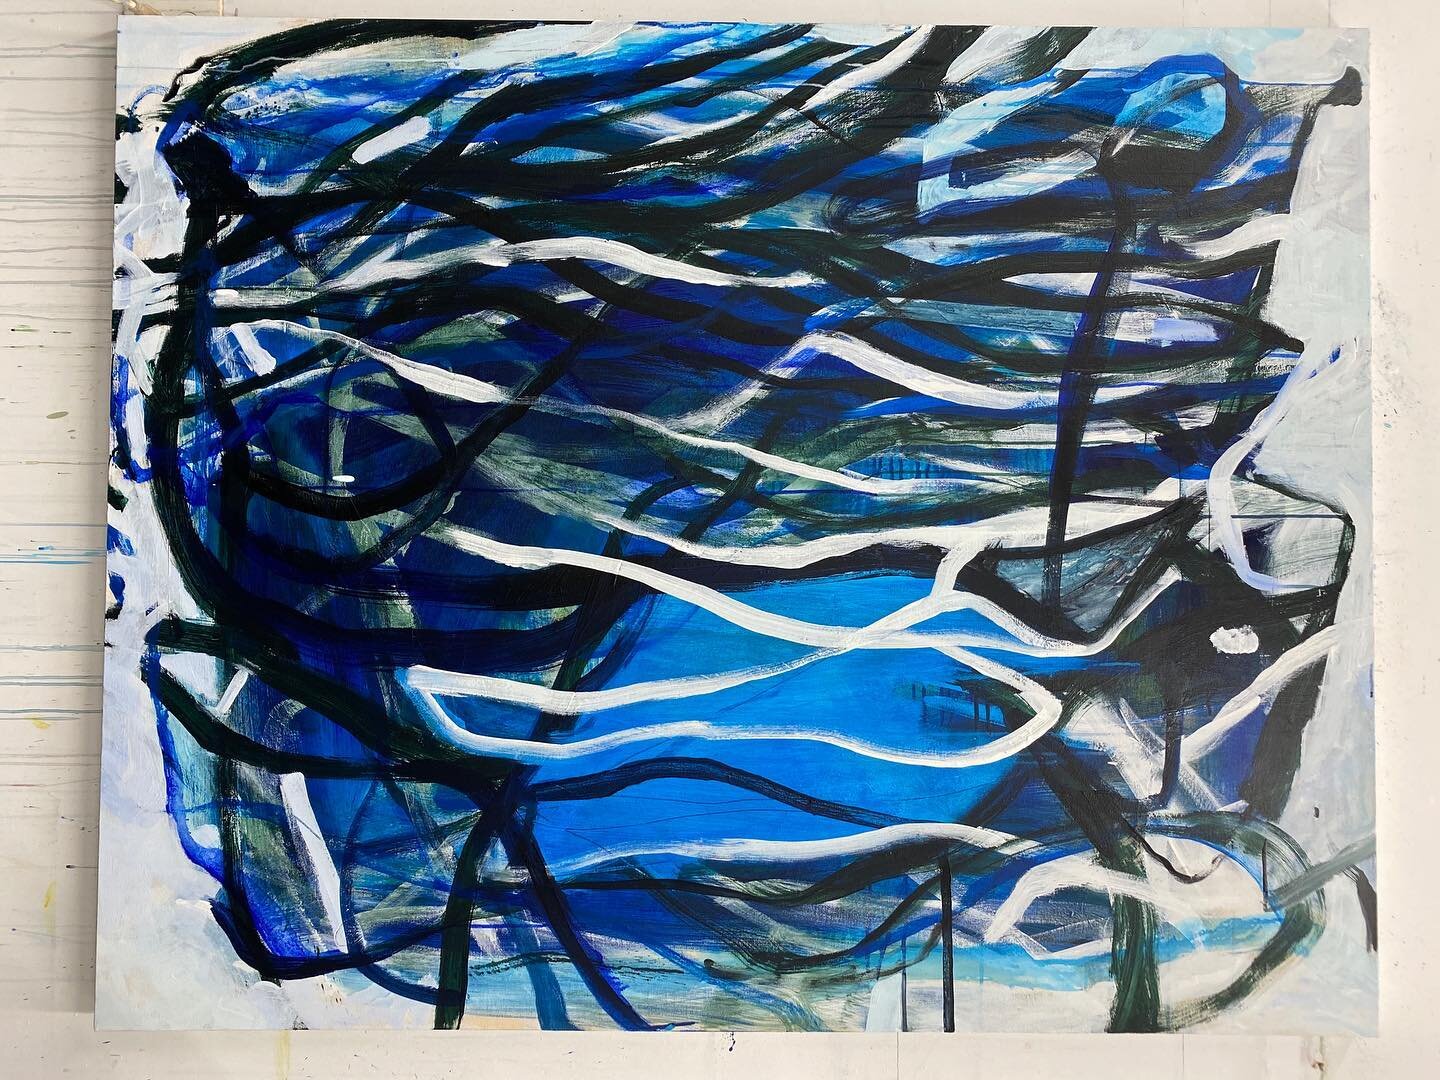 Finished my big painting, 48x60&rdquo;, on canvas.  #blue #water #abstractpainting #designer #big painting